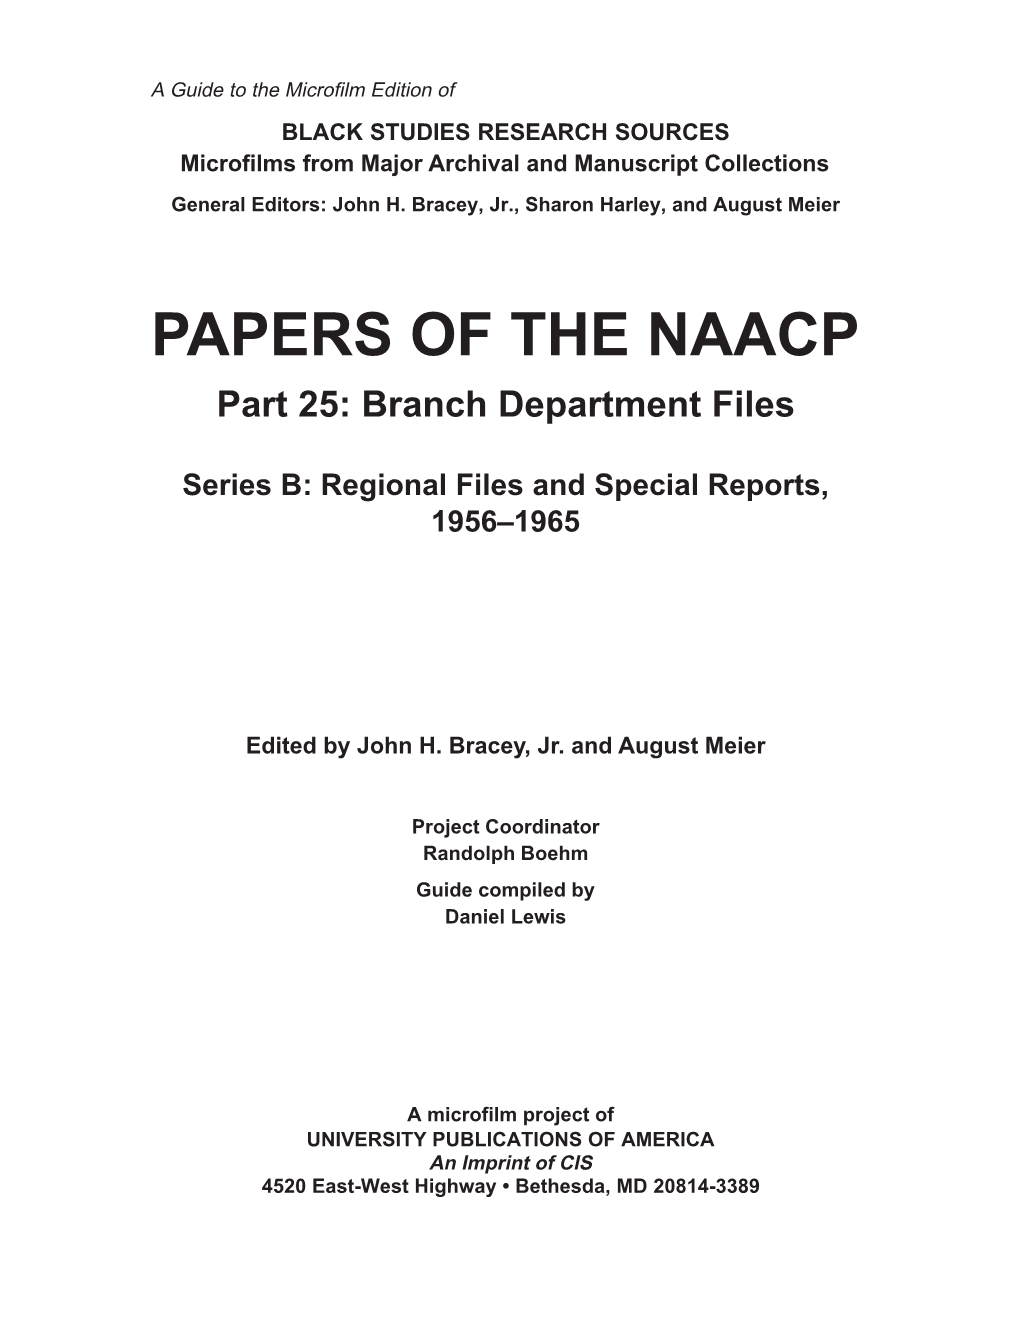 PAPERS of the NAACP Part 25: Branch Department Files